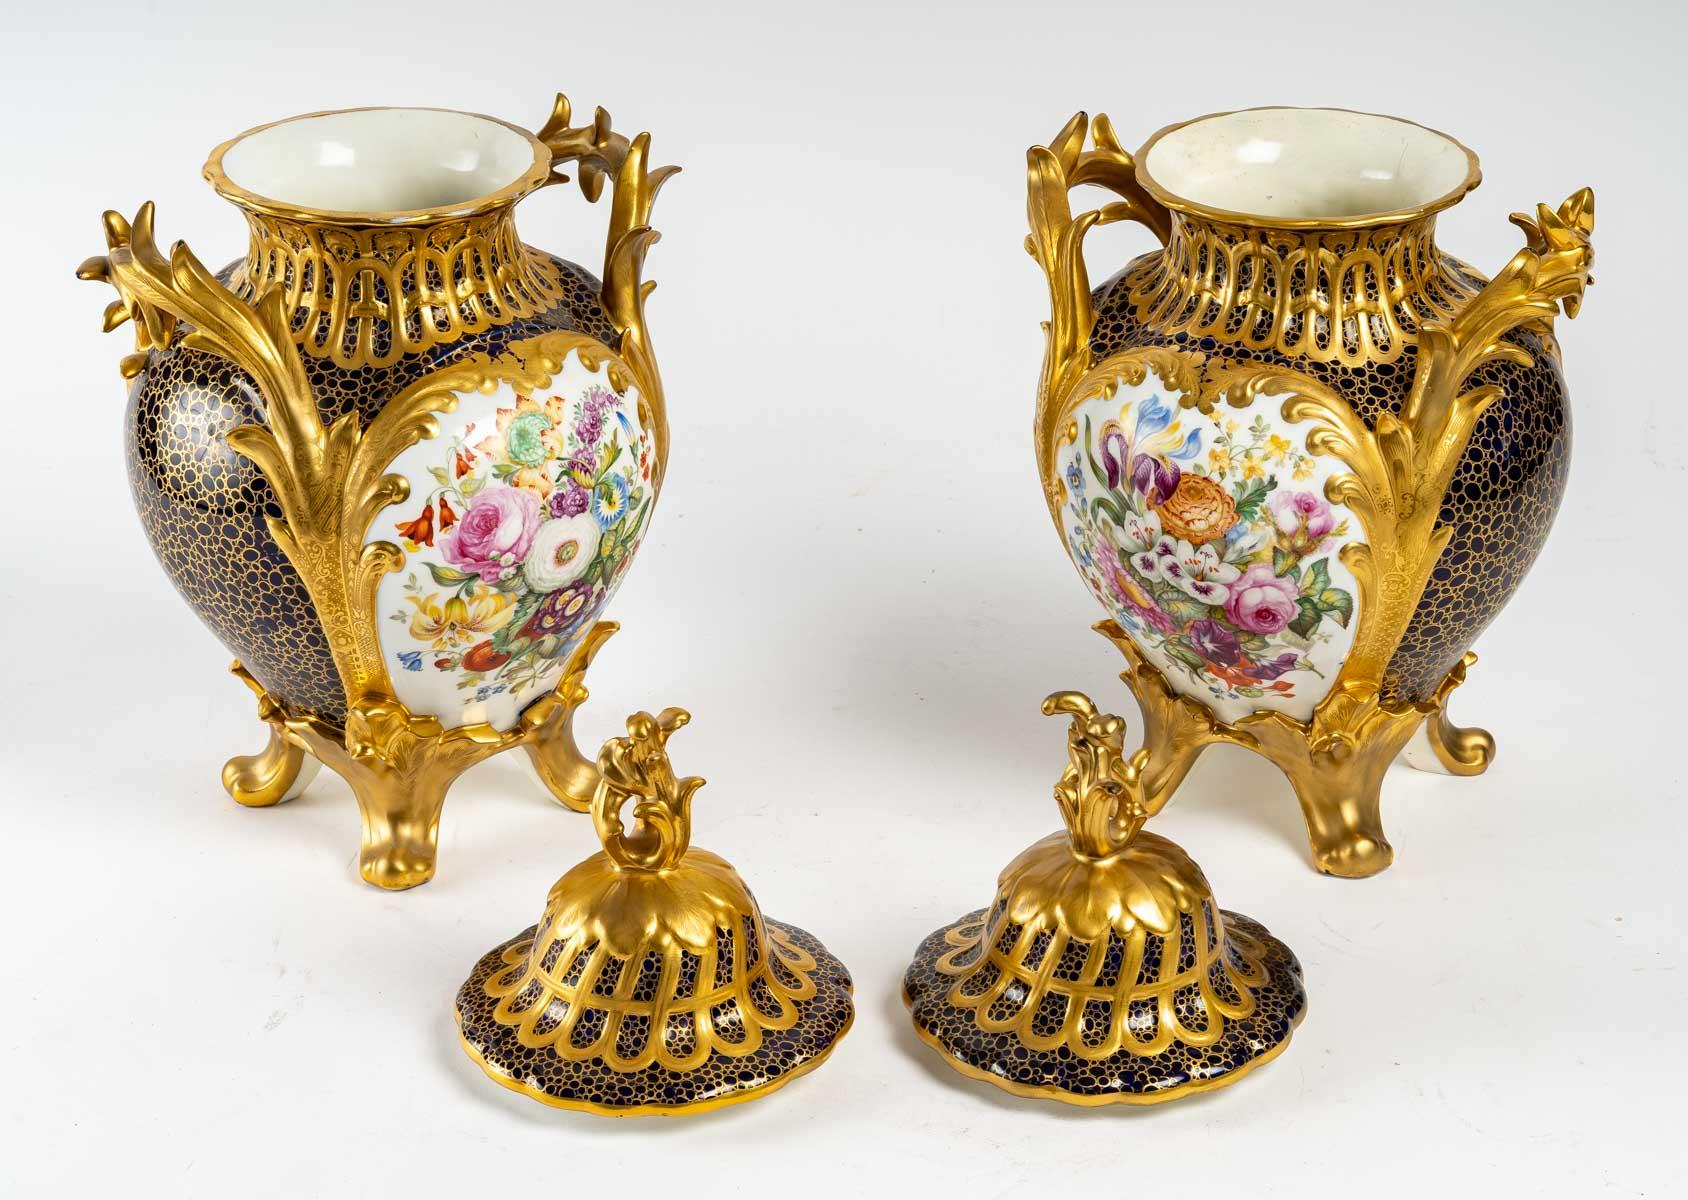 A pair of gilt and enamelled porcelain covered vases, 19th century, Napoleon III period, signed WT.
Measures: H: 38 cm, W: 24 cm, D: 21 cm.